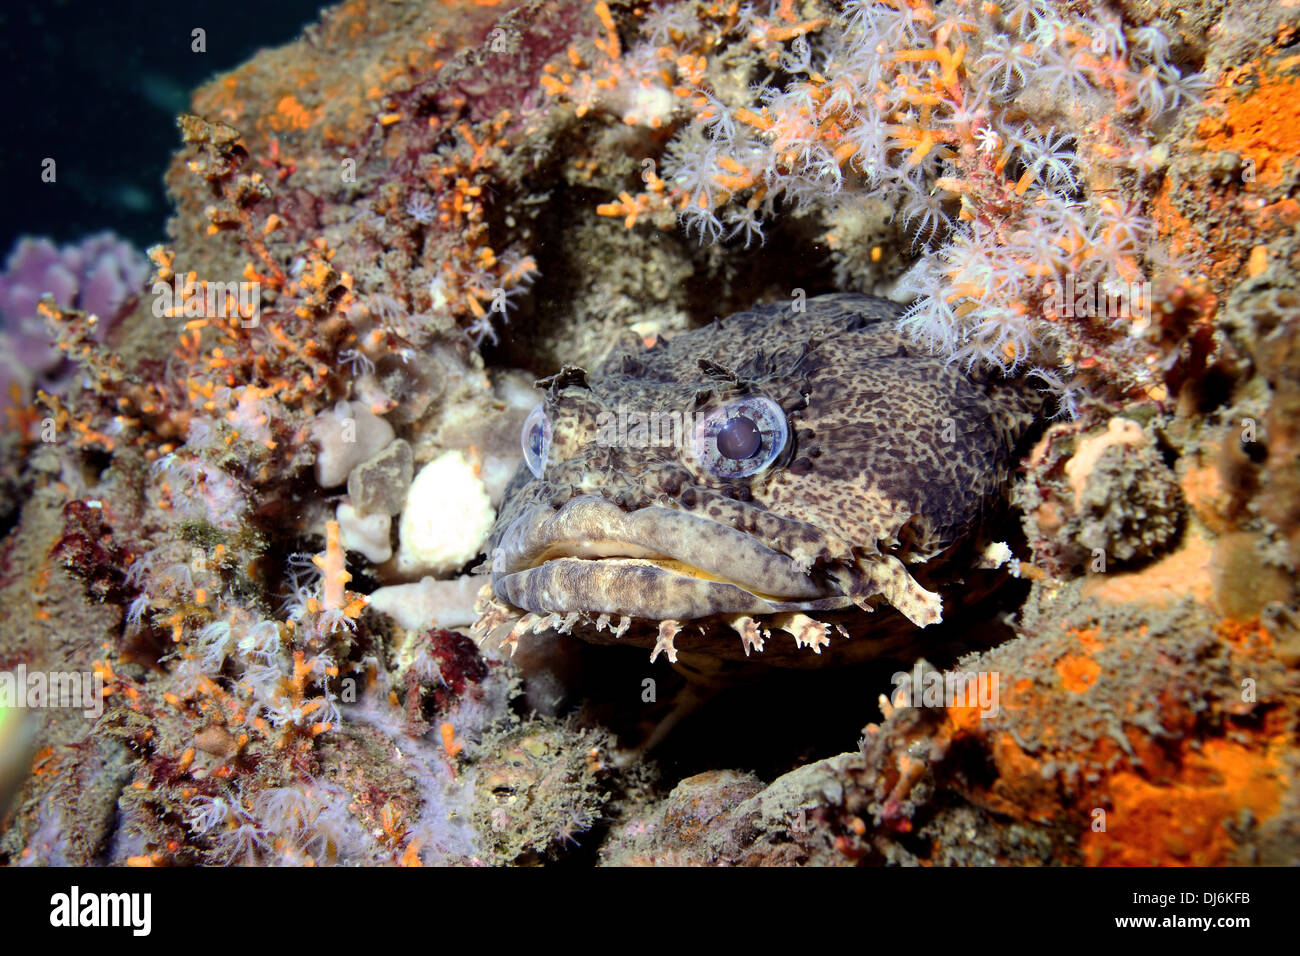 A perfectly camouflaged Toad fish sits within the multitudes of sea life that inhabit an old shipwreck Stock Photo